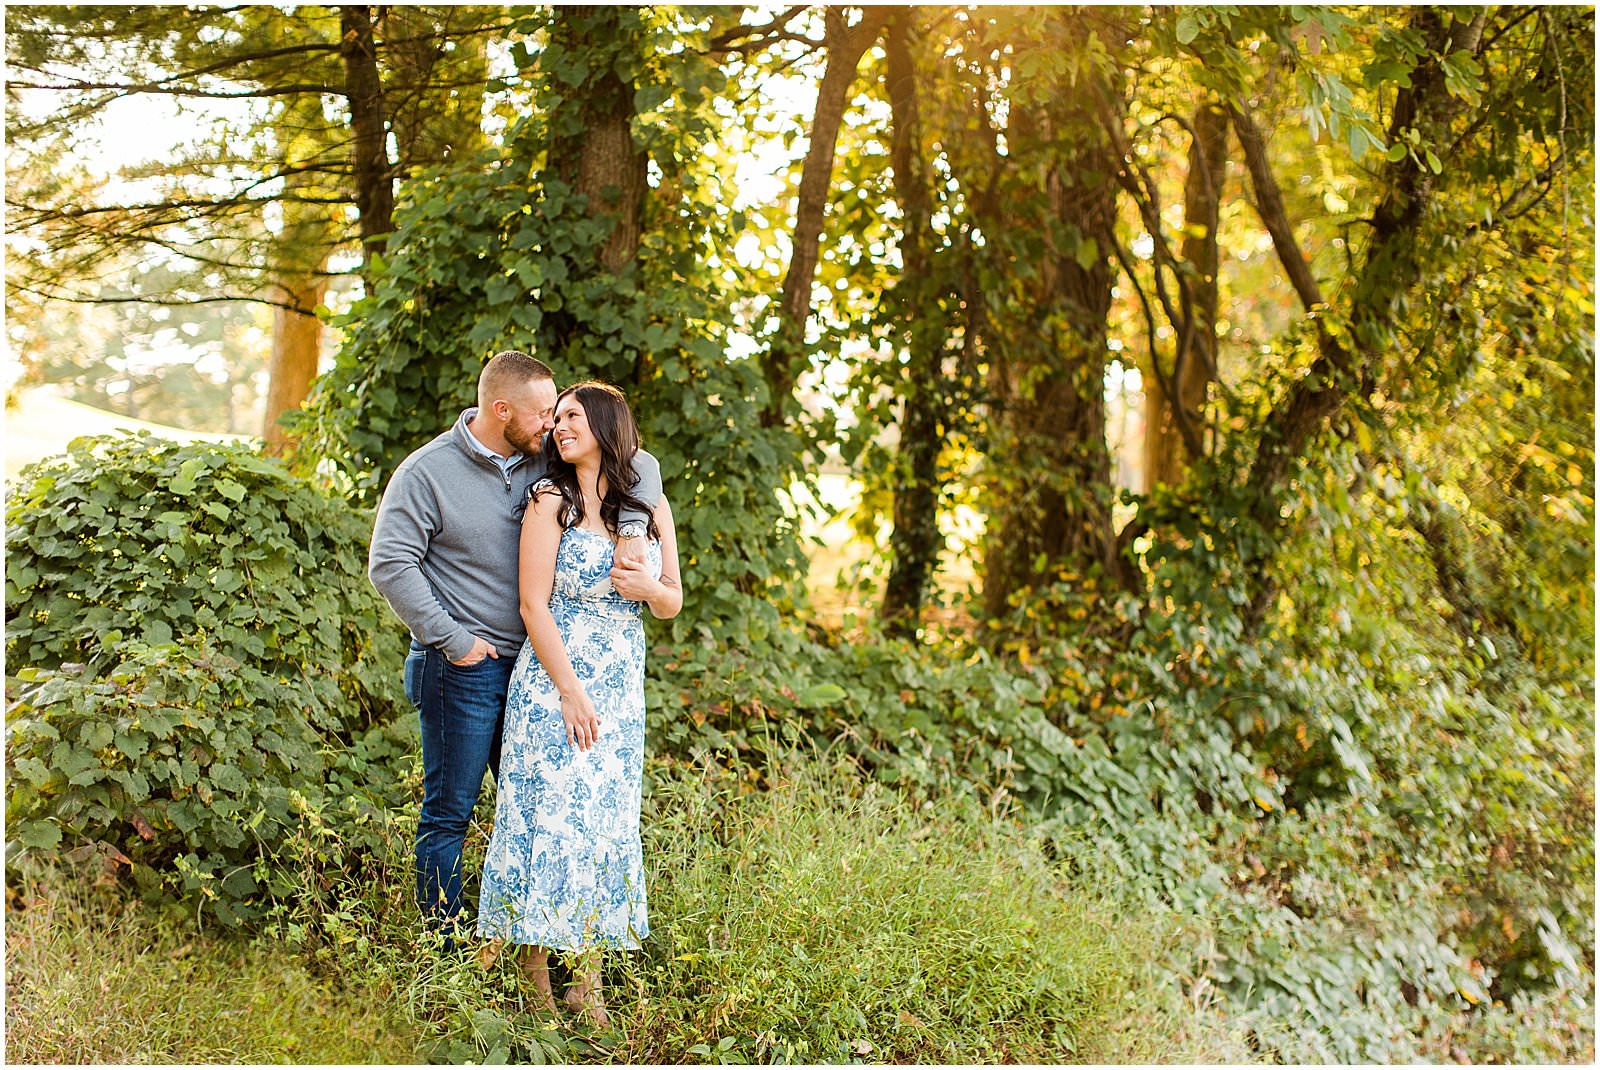 A Rolling Hills Country Club Engagement Session | Meagan and Kyle | Bret and Brandie Photography 0019.jpg